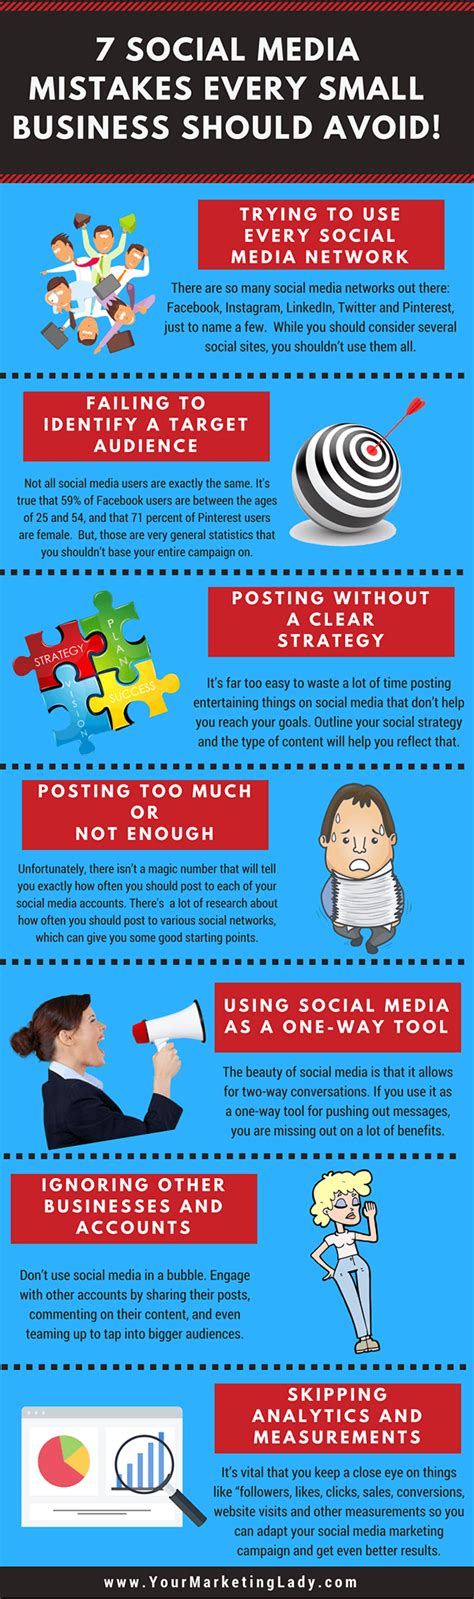 7 social media mistakes every small business should avoid